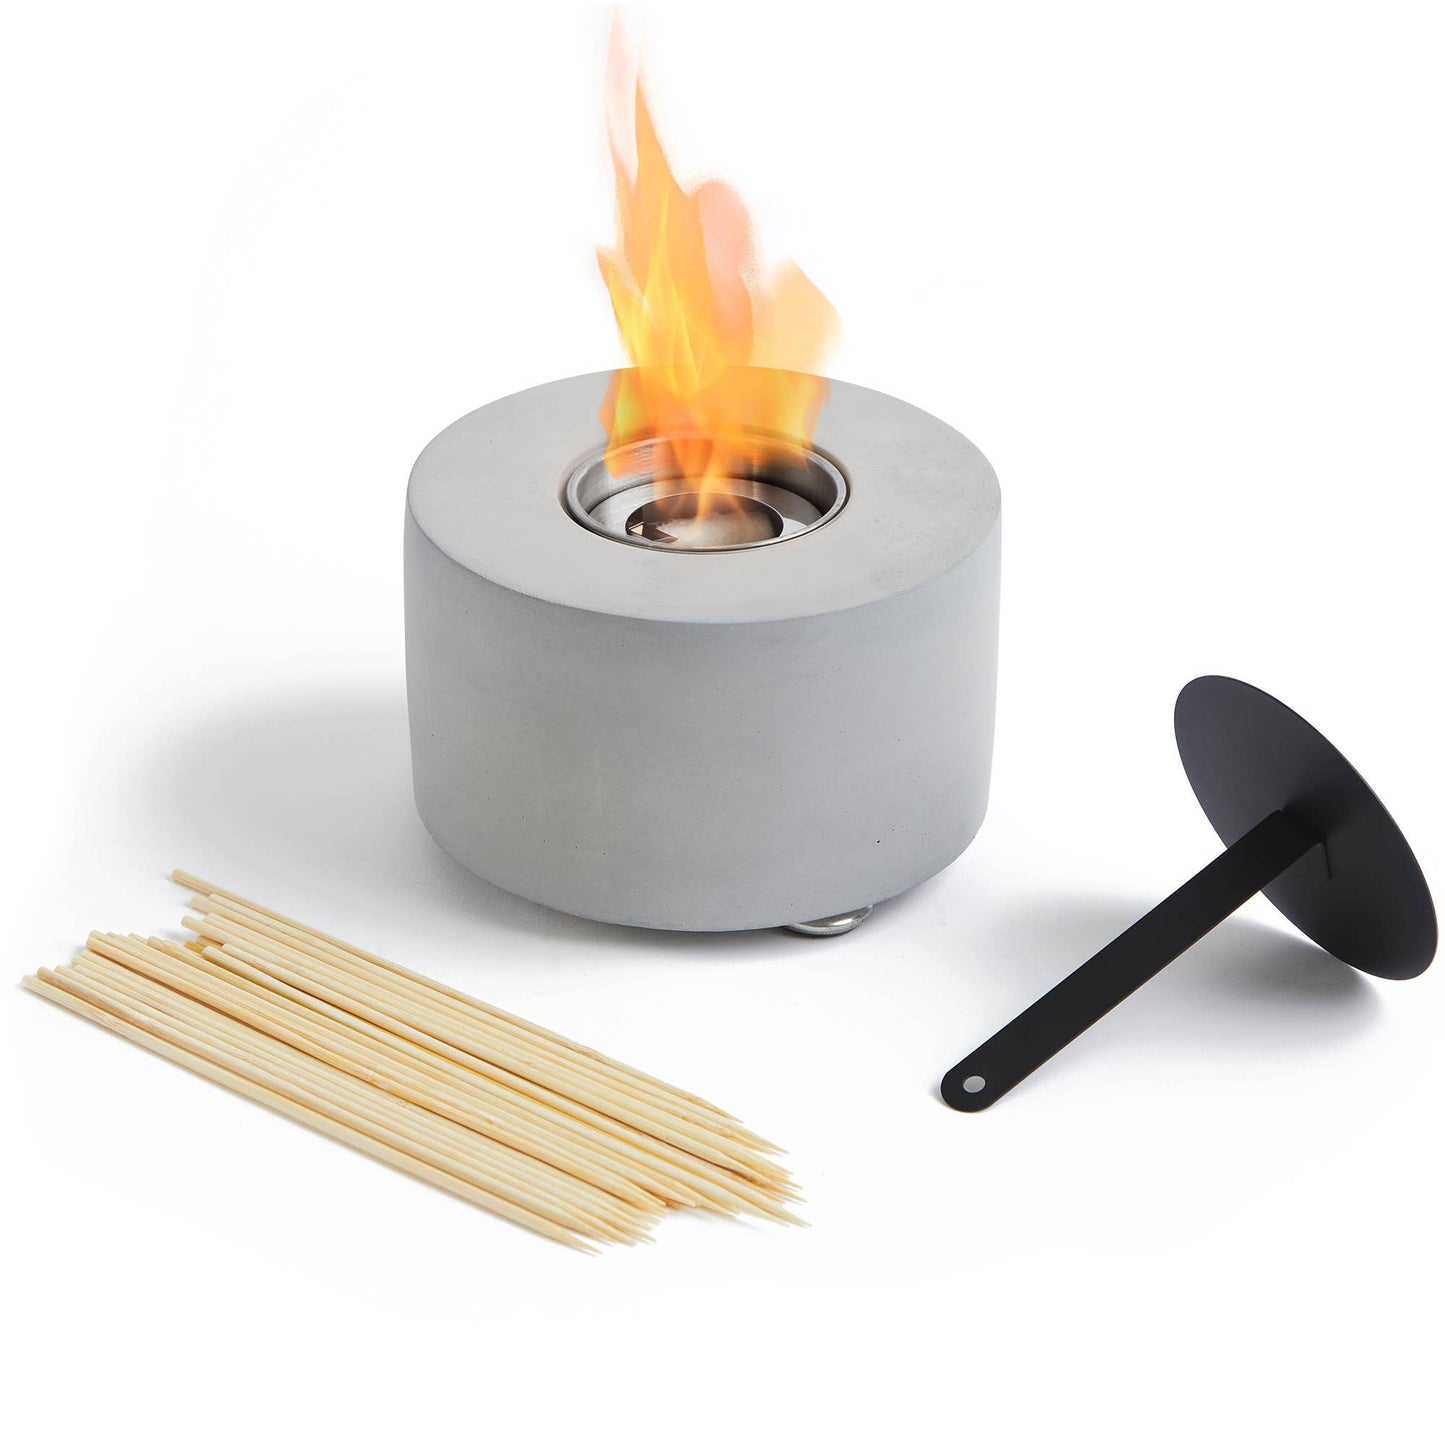 HomeBuddy Table Top Fire Pit Bowl - Tabletop Fire Pit - Curated Home Decor